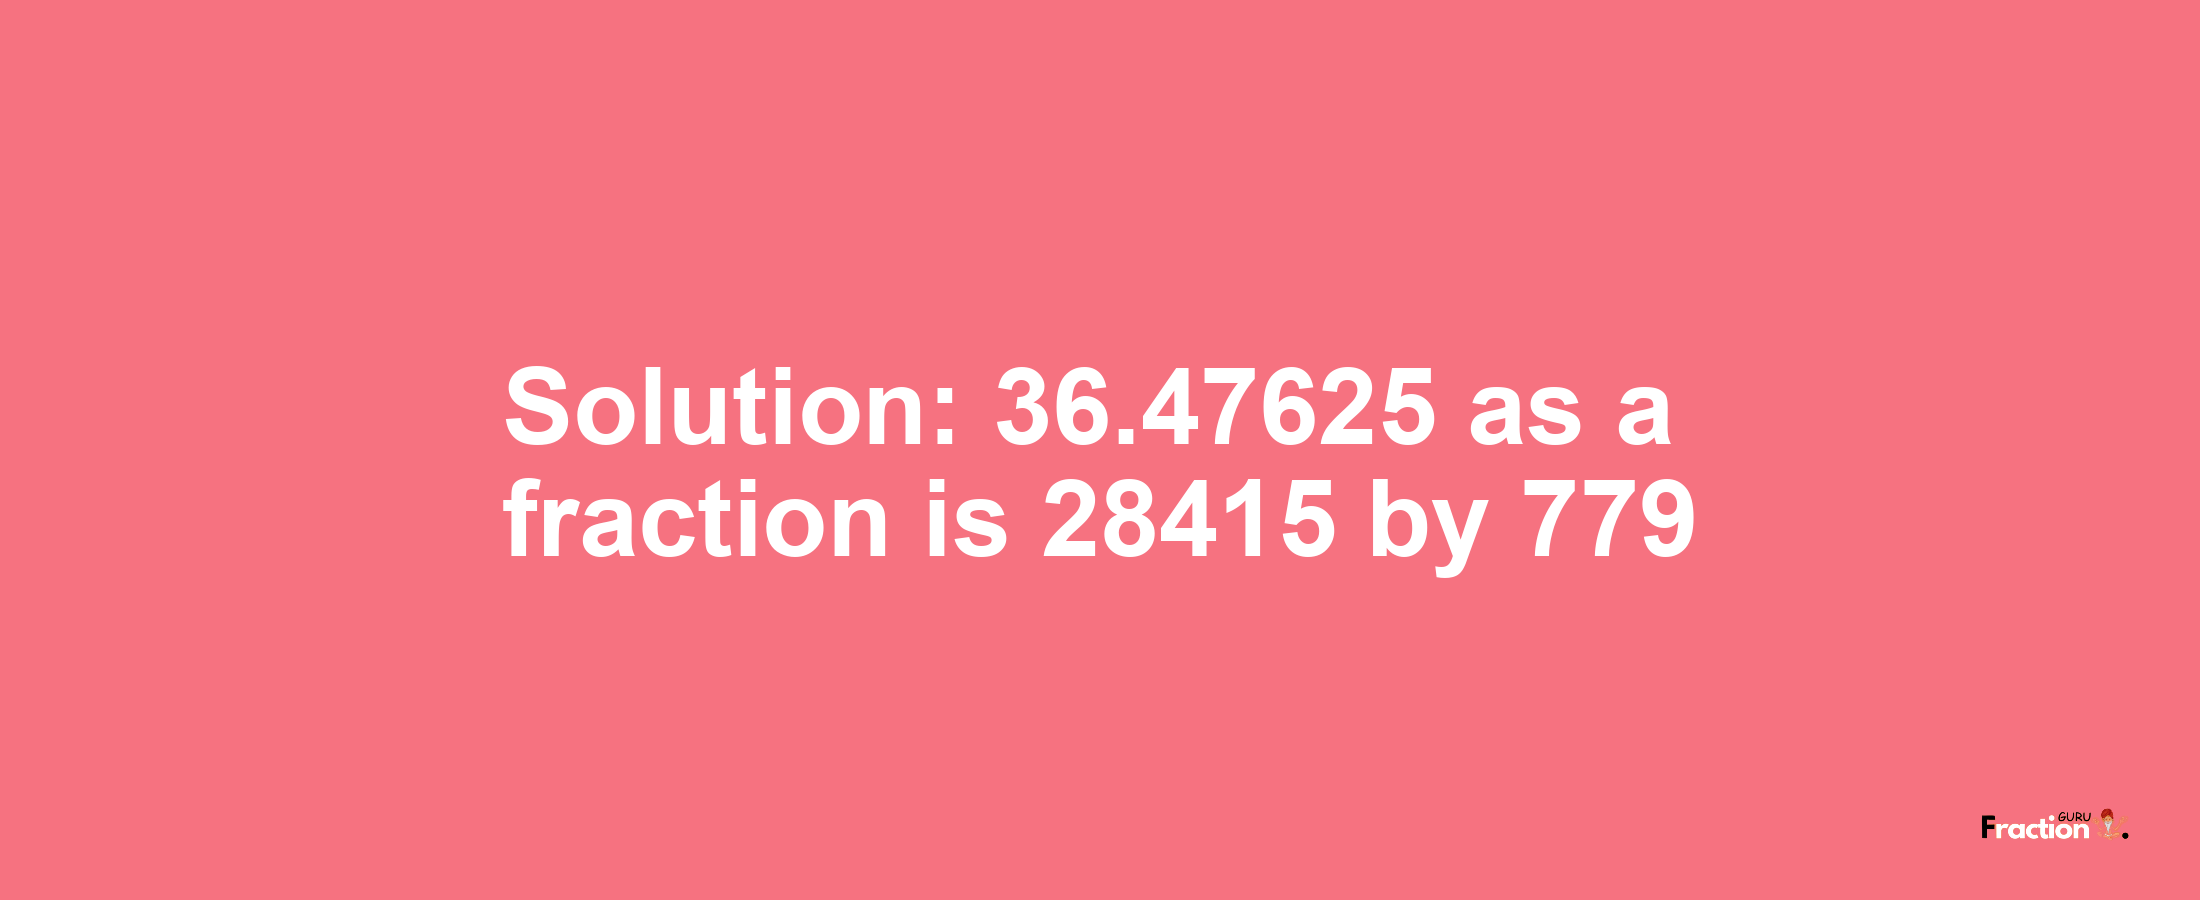 Solution:36.47625 as a fraction is 28415/779